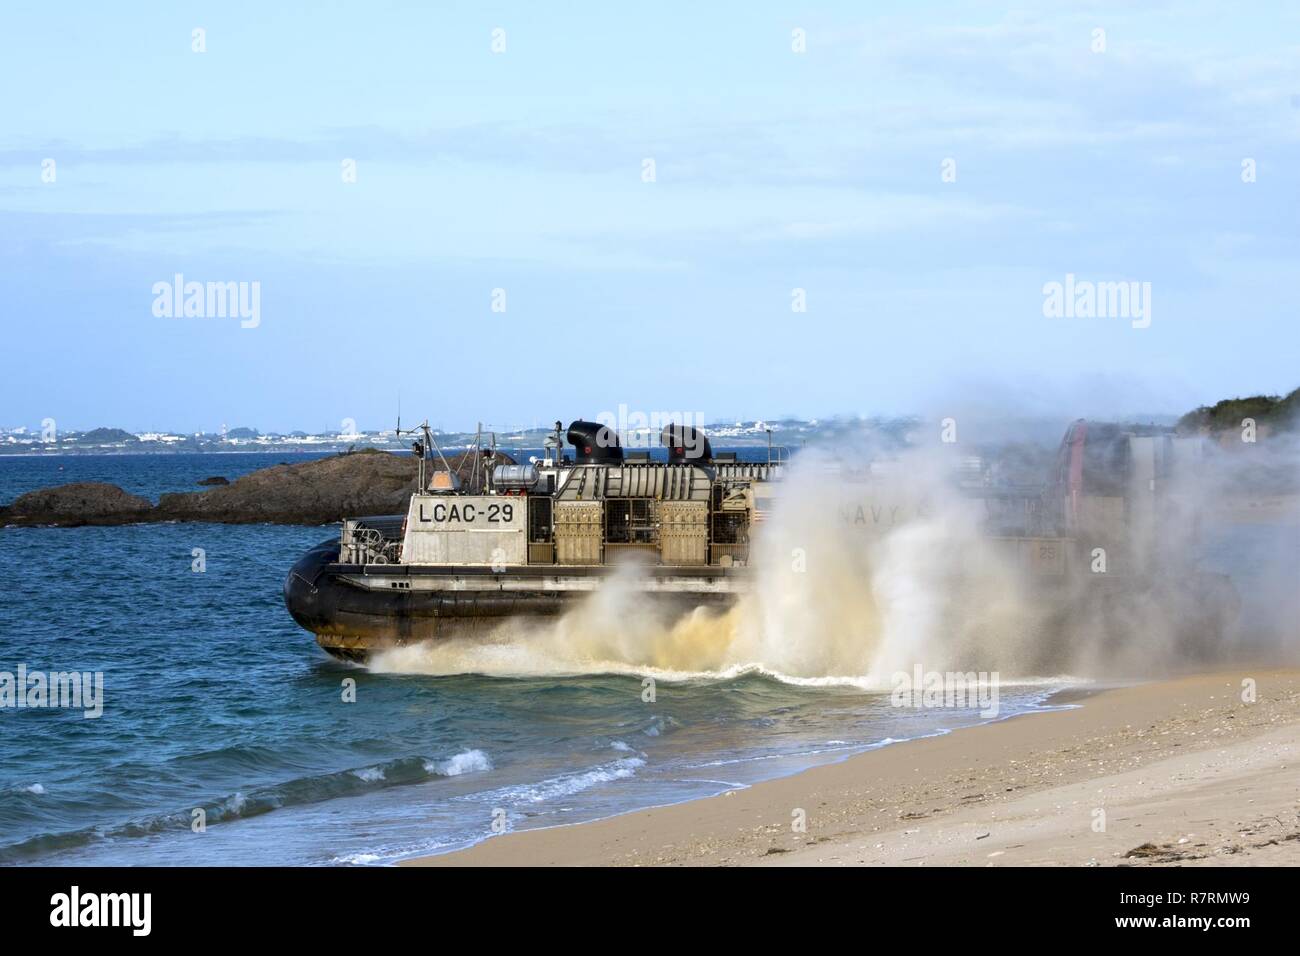 KIN BLUE BEACH, Okinawa (April 5, 2017) Landing craft air cushion (LCAC) 29, assigned to Naval Beach Unit (NBU) 7, departs the beach during a 31st Marine Expeditionary Unit (MEU) offload from the amphibious assault ship USS Bonhomme Richard (LHD 6). Bonhomme Richard, flagship of the Bonhomme Richard Expeditionary Strike Group, with embarked 31st MEU, is on a patrol, operating in the Indo-Asia-Pacific region to enhance warfighting readiness and posture forward as a ready-response force for any type of contingency. Stock Photo